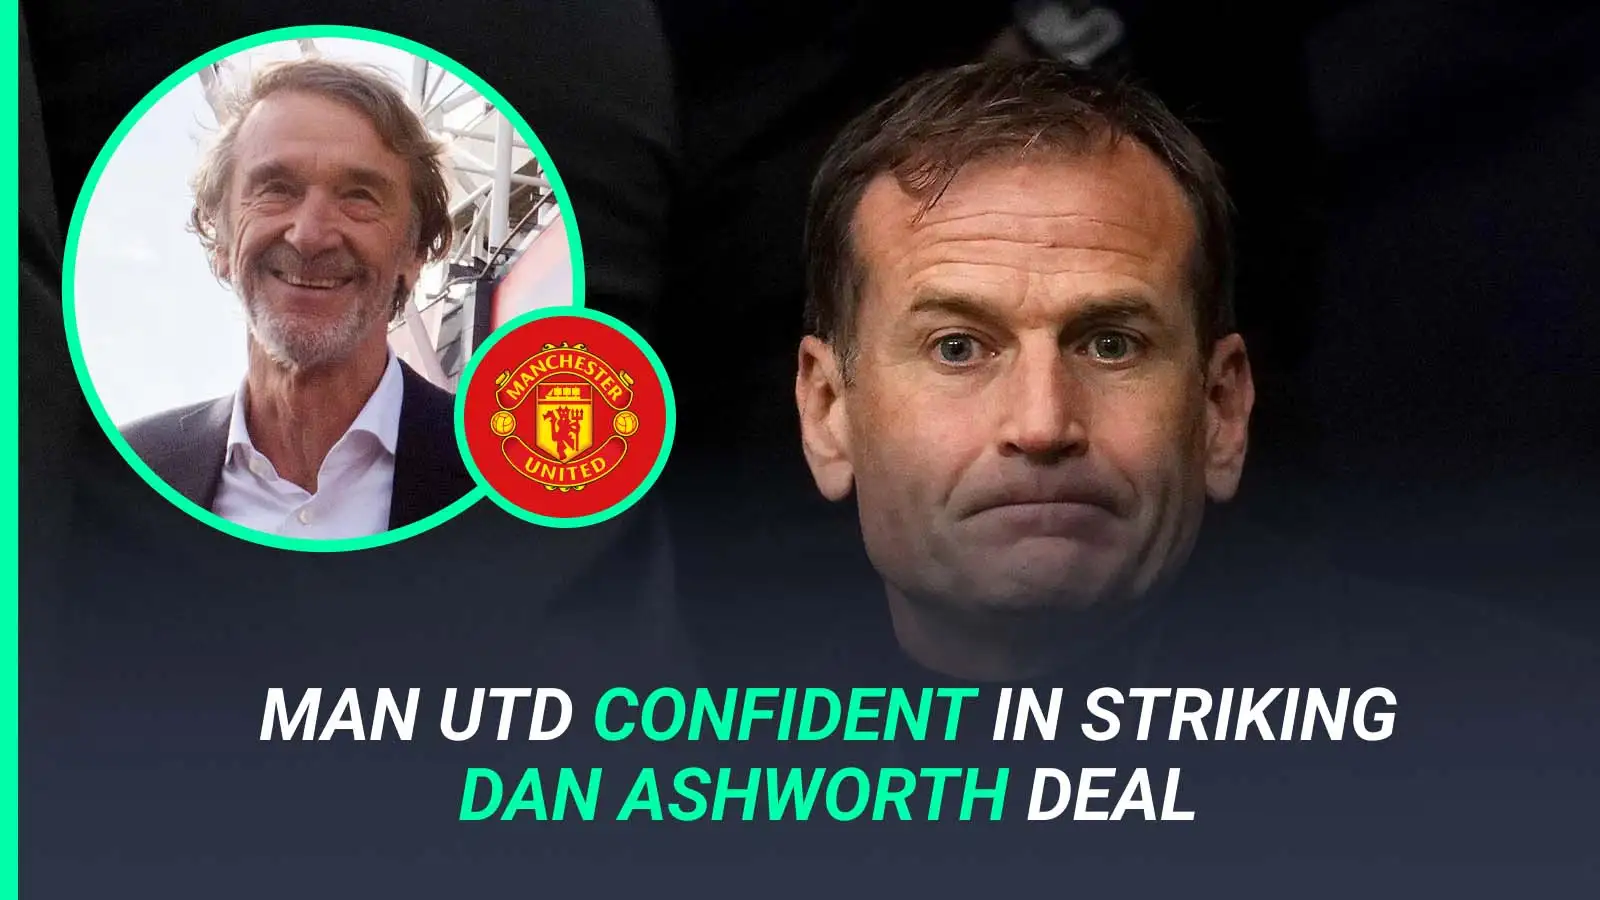 Man Utd are confident in striking a deal for Dan Ashworth